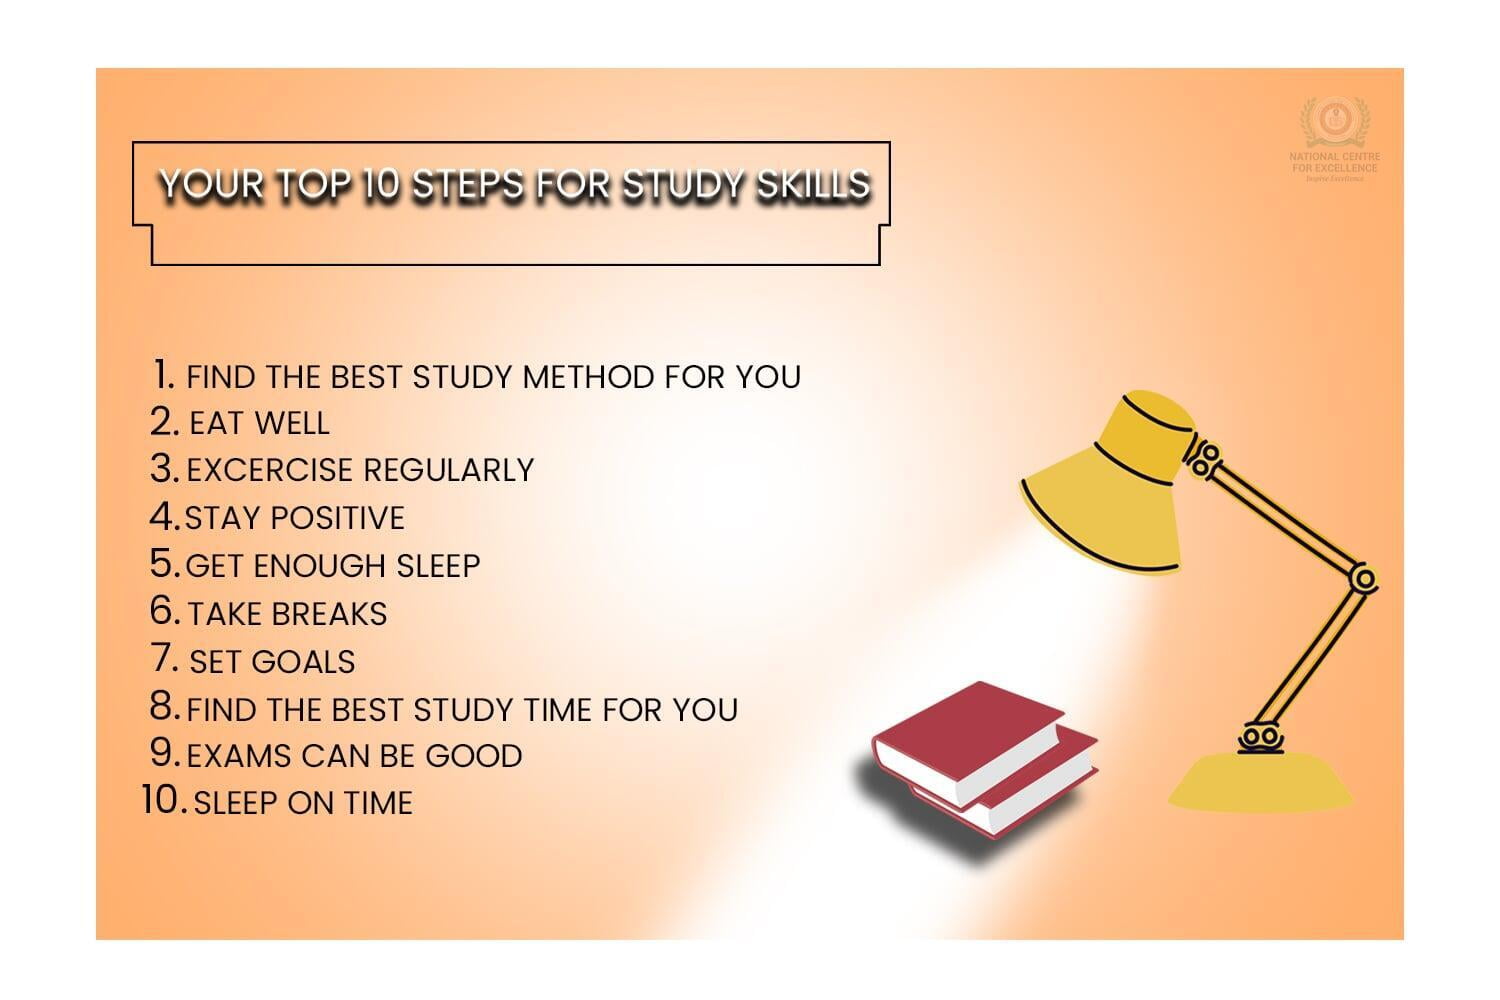 National Centre for Excellence - Tips for Study Skills